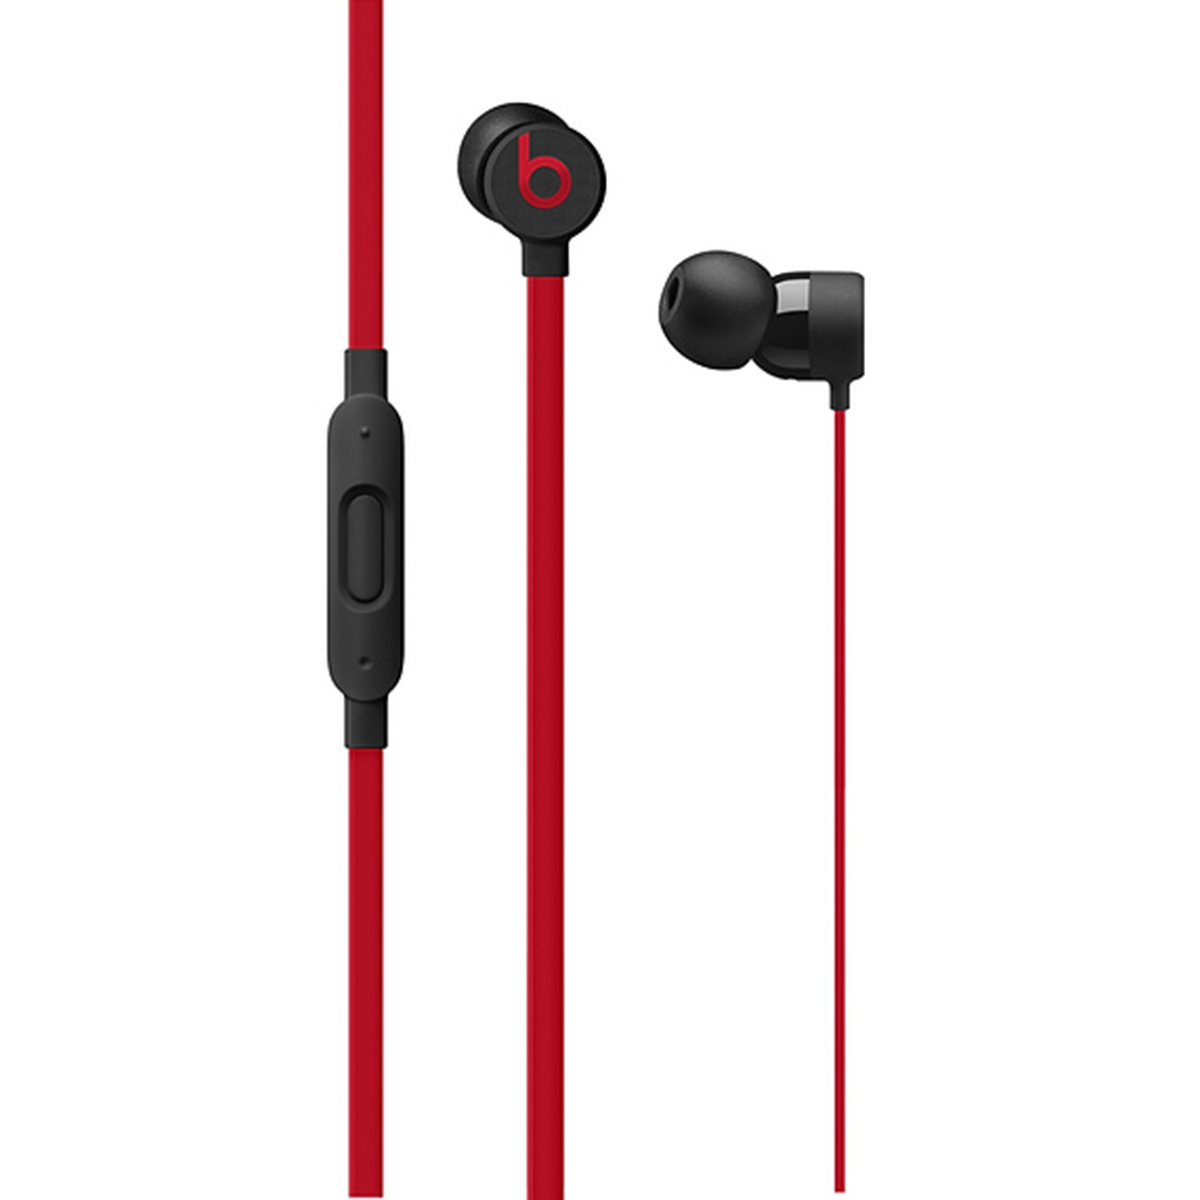 Beats urBeats3 Earphones with 3.5mm Plug - The Beats Decade Collection, Defiant Black-Red